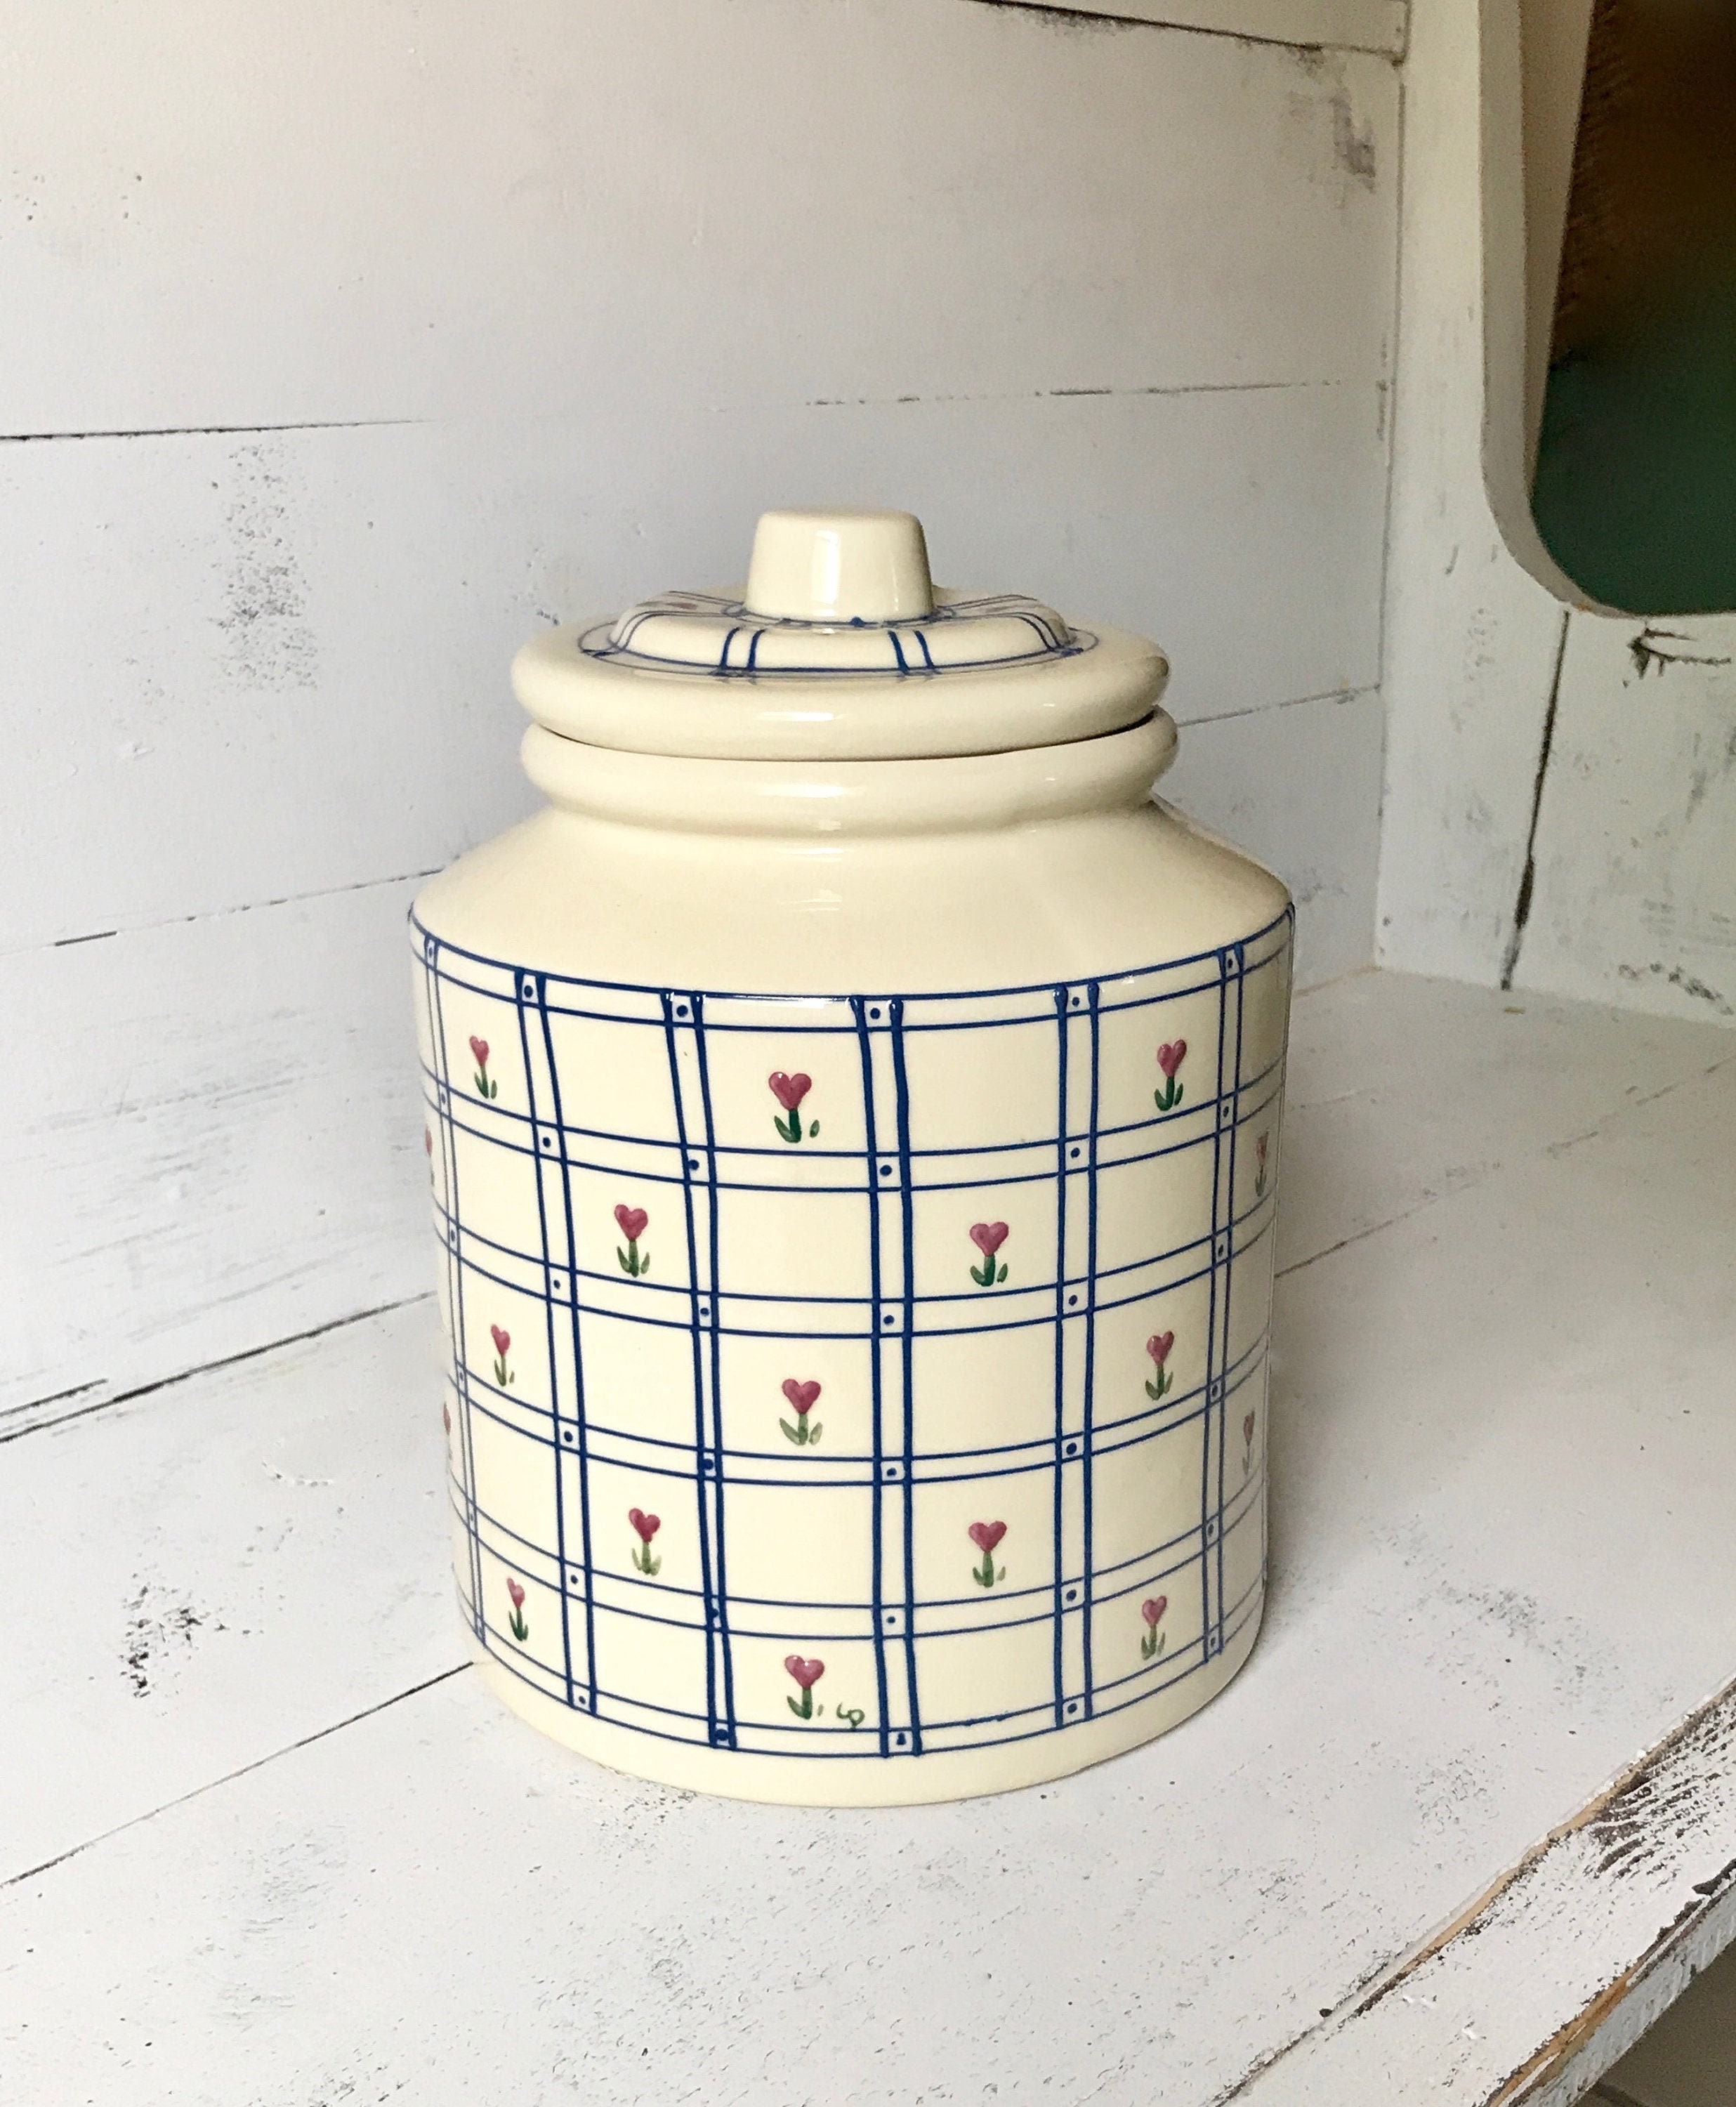 Longaberger Canisters for sale| 34 ads